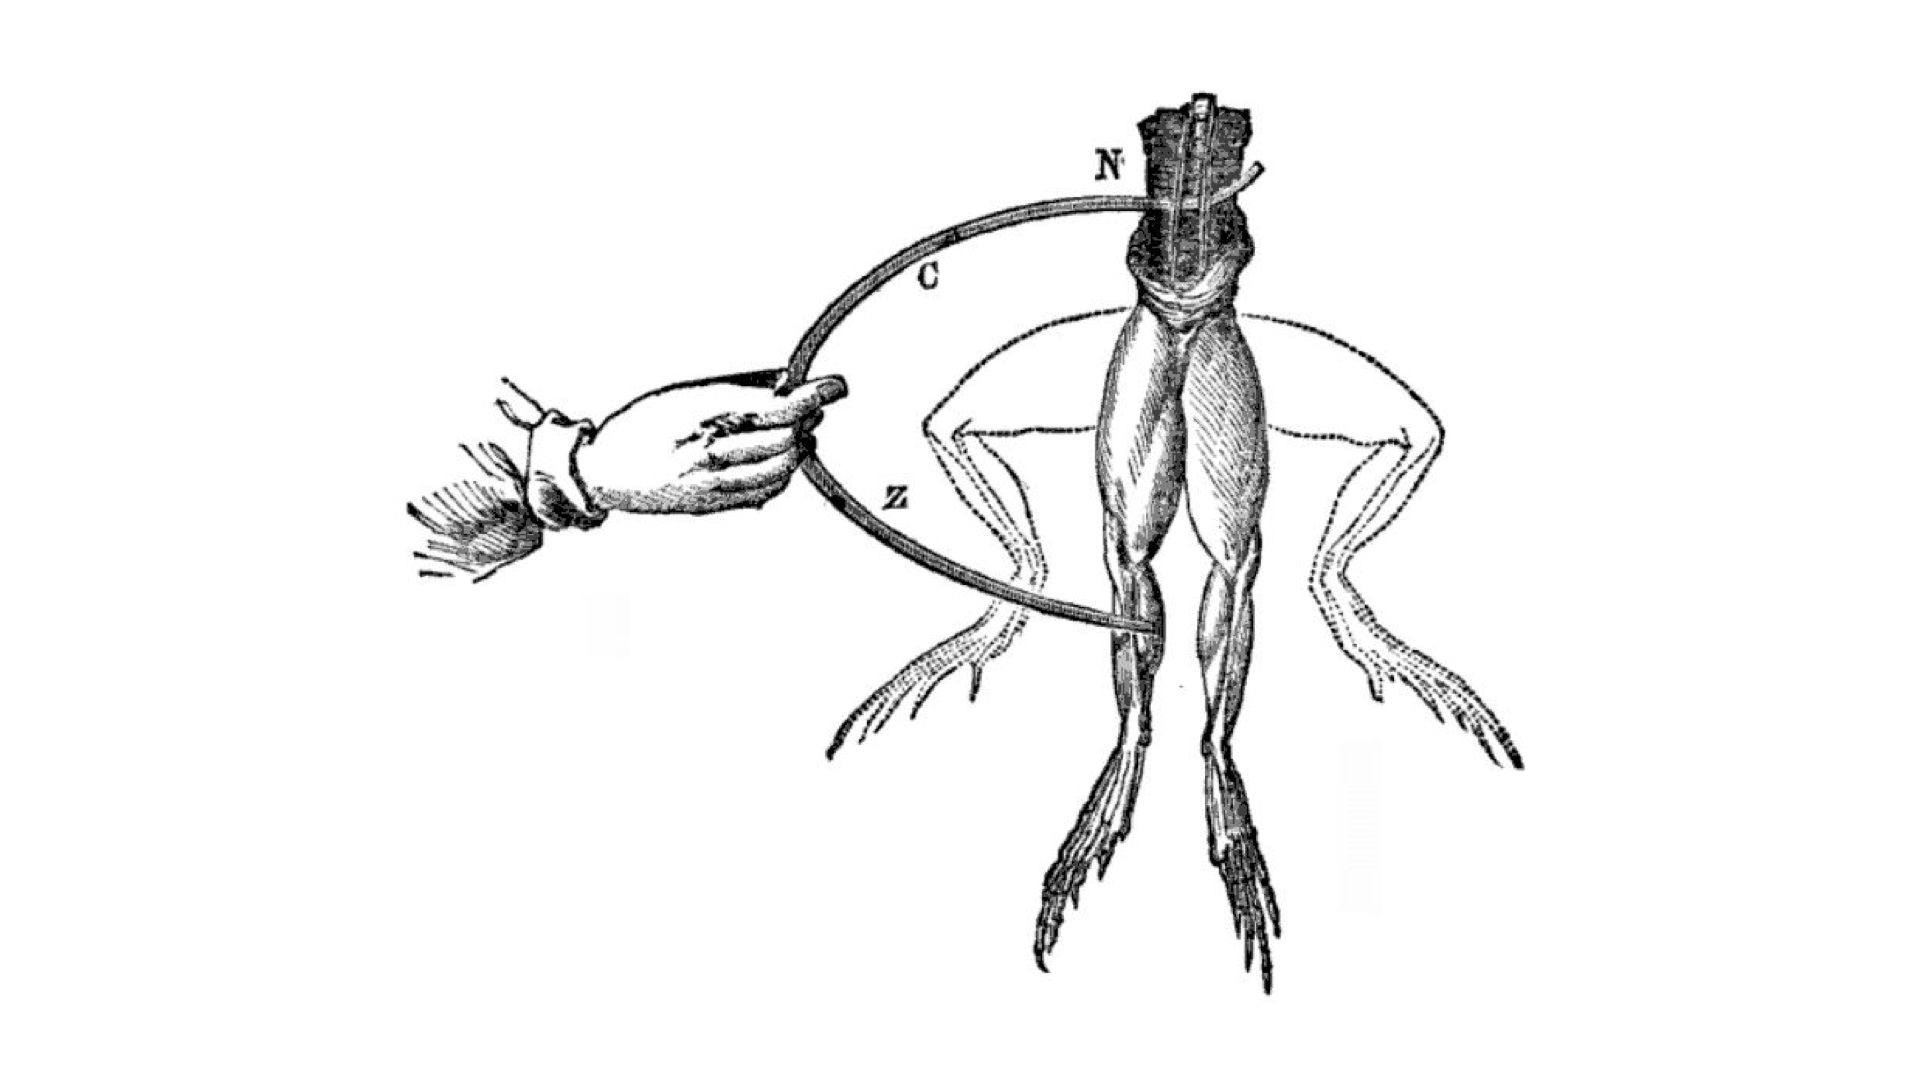 a diagram of twitching frog's legs